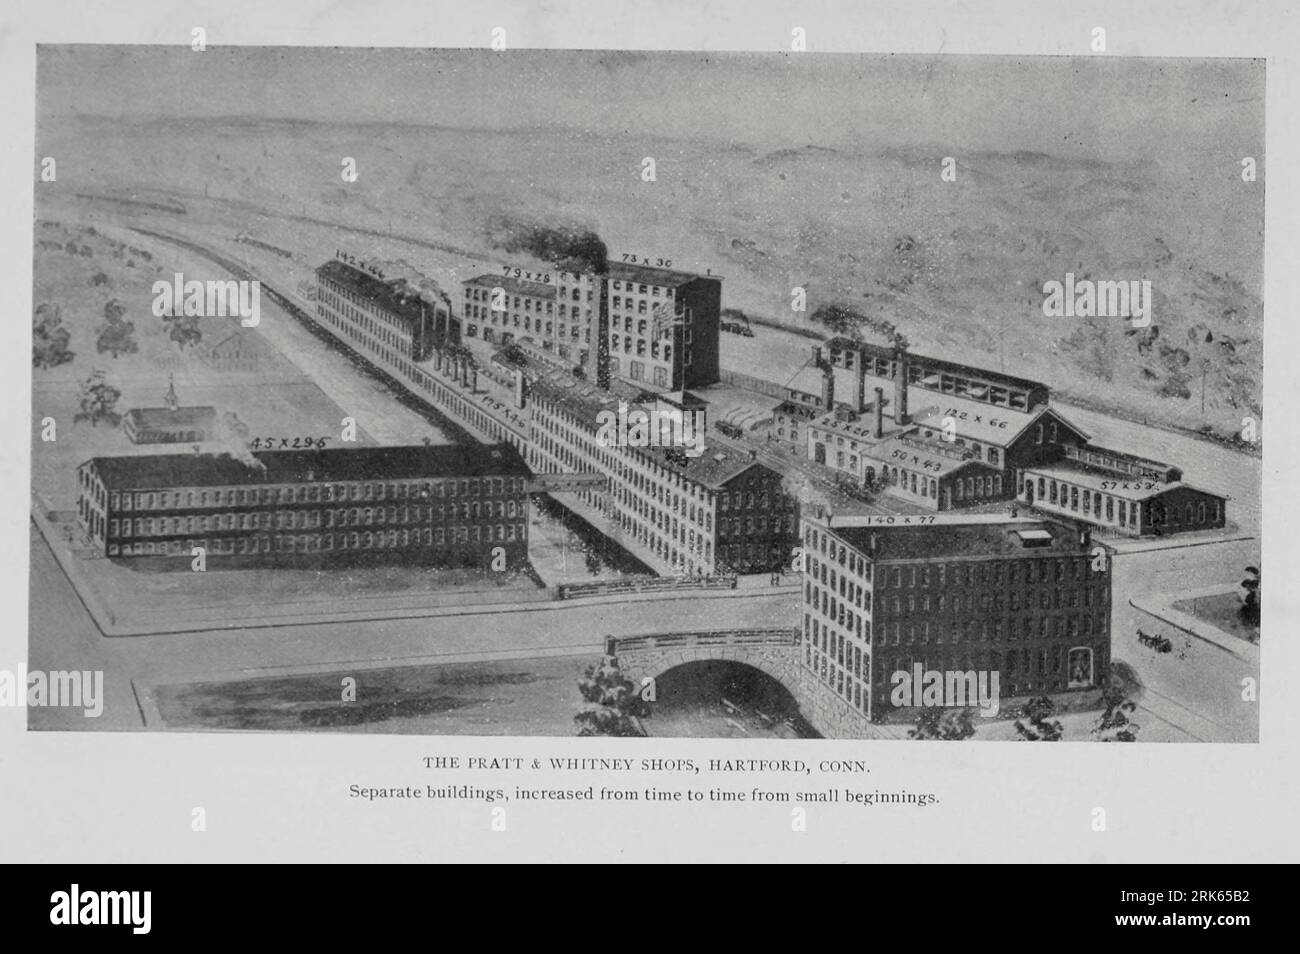 Pratt & Whitney Shops HARTFORD, Connecticut Separate Buildings increased from small beginnings from the Article MODERN MACHINE-SHOP ECONOMICS PRIME REQUISITES OF SHOP CONSTRUCTION By Horace L. Arnold from The Engineering Magazine DEVOTED TO INDUSTRIAL PROGRESS Volume XI October 1896 NEW YORK The Engineering Magazine Co Stock Photo